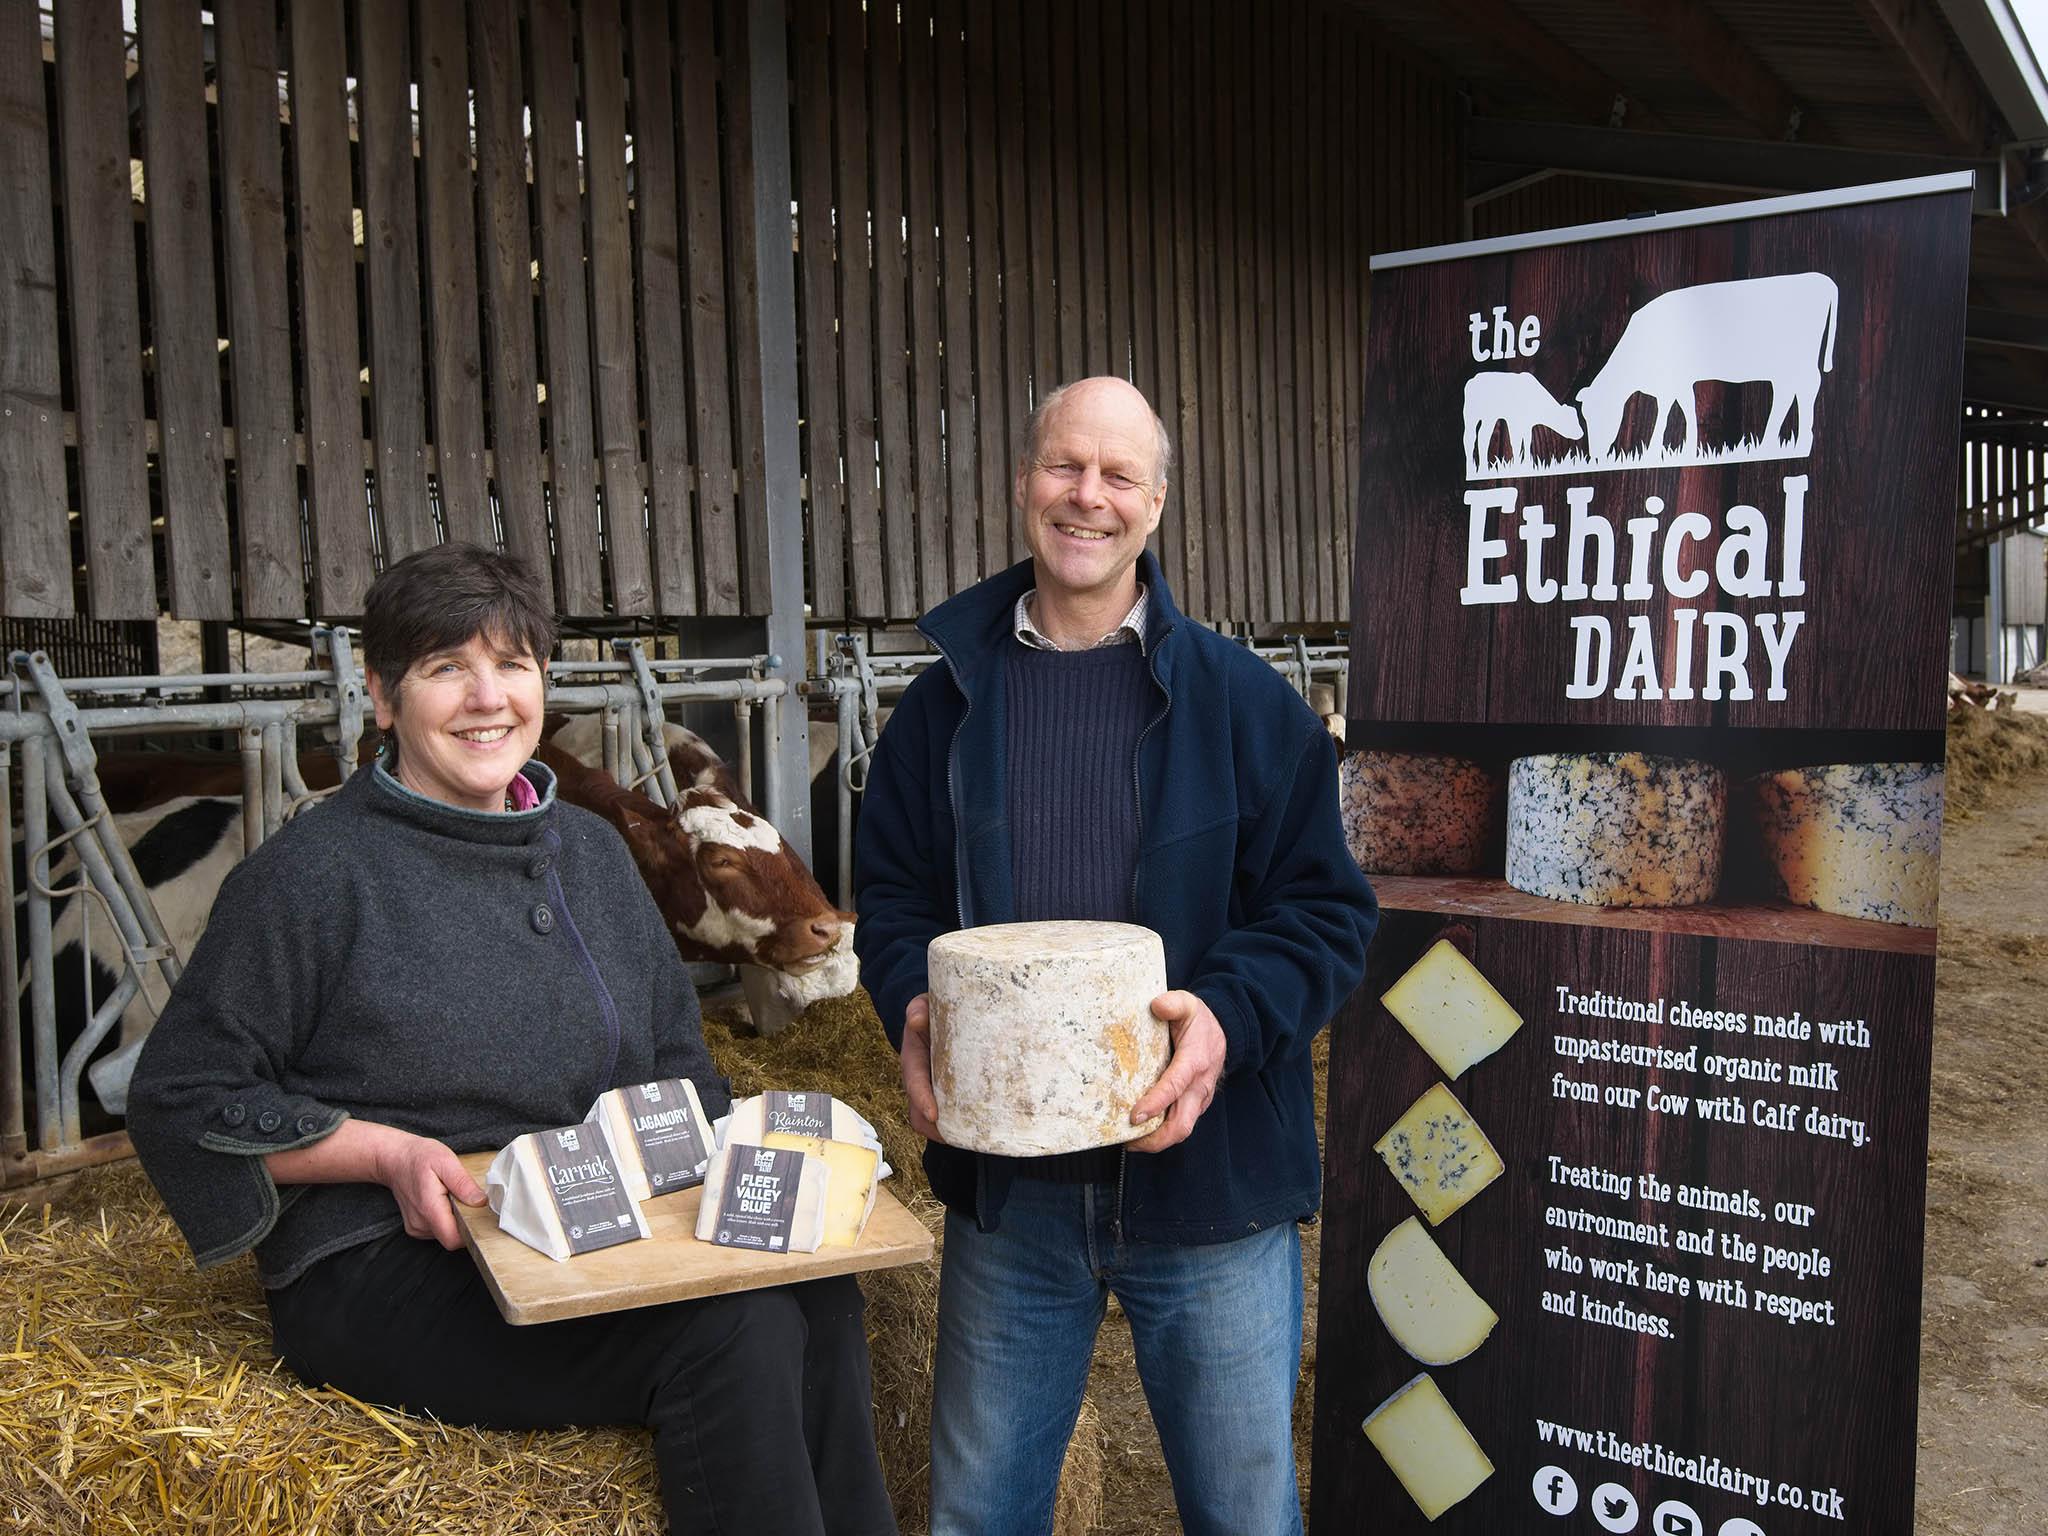 Before inheriting the farm, David used to encourage farms to work intensively; now he and Wilma make ethical cheese